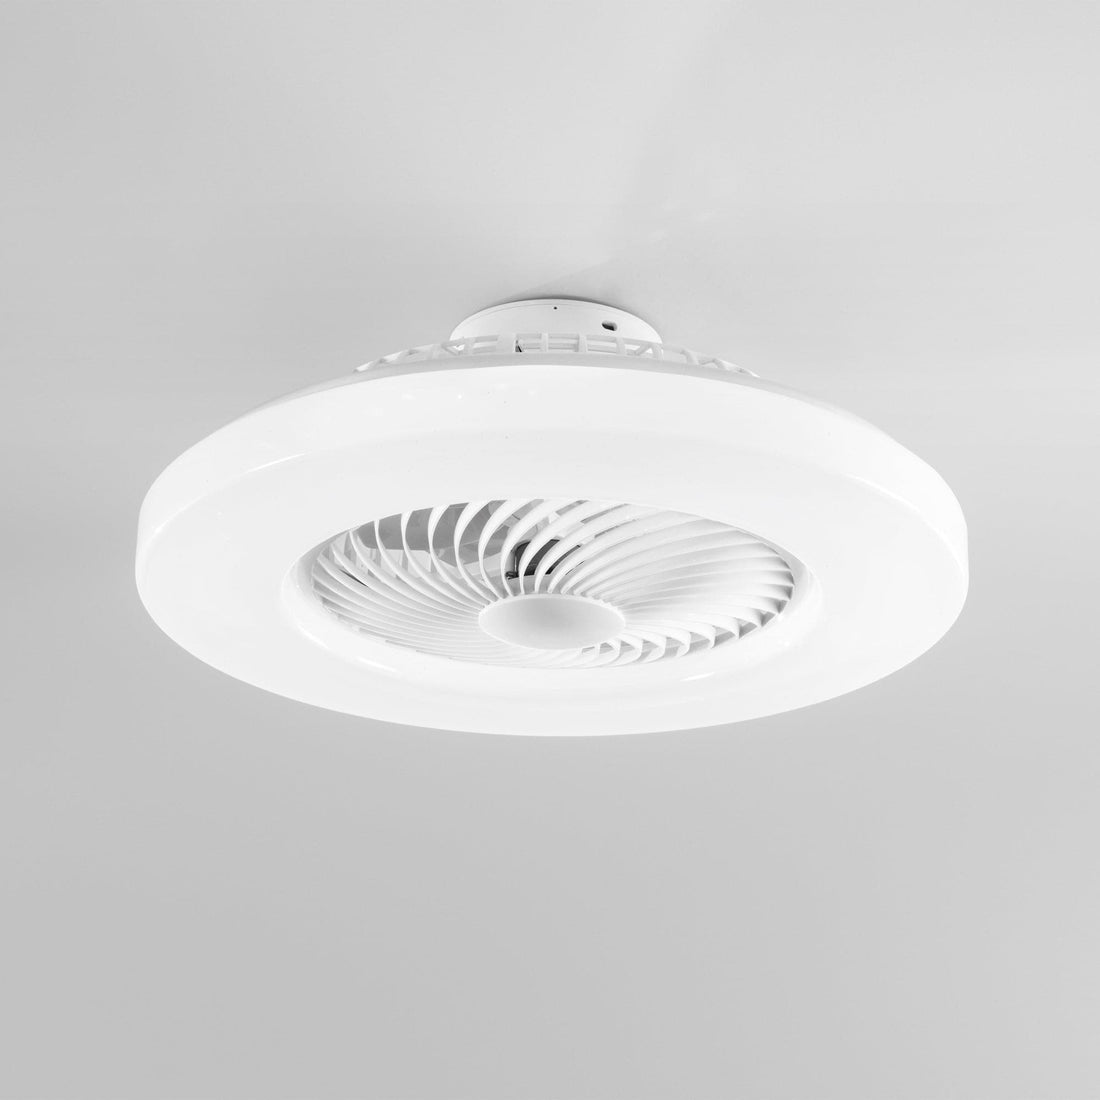 CEILING LIGHT WITH FAN SCIROCCO PLASTIC WHITE D60 CM LED 40W CCT SMART